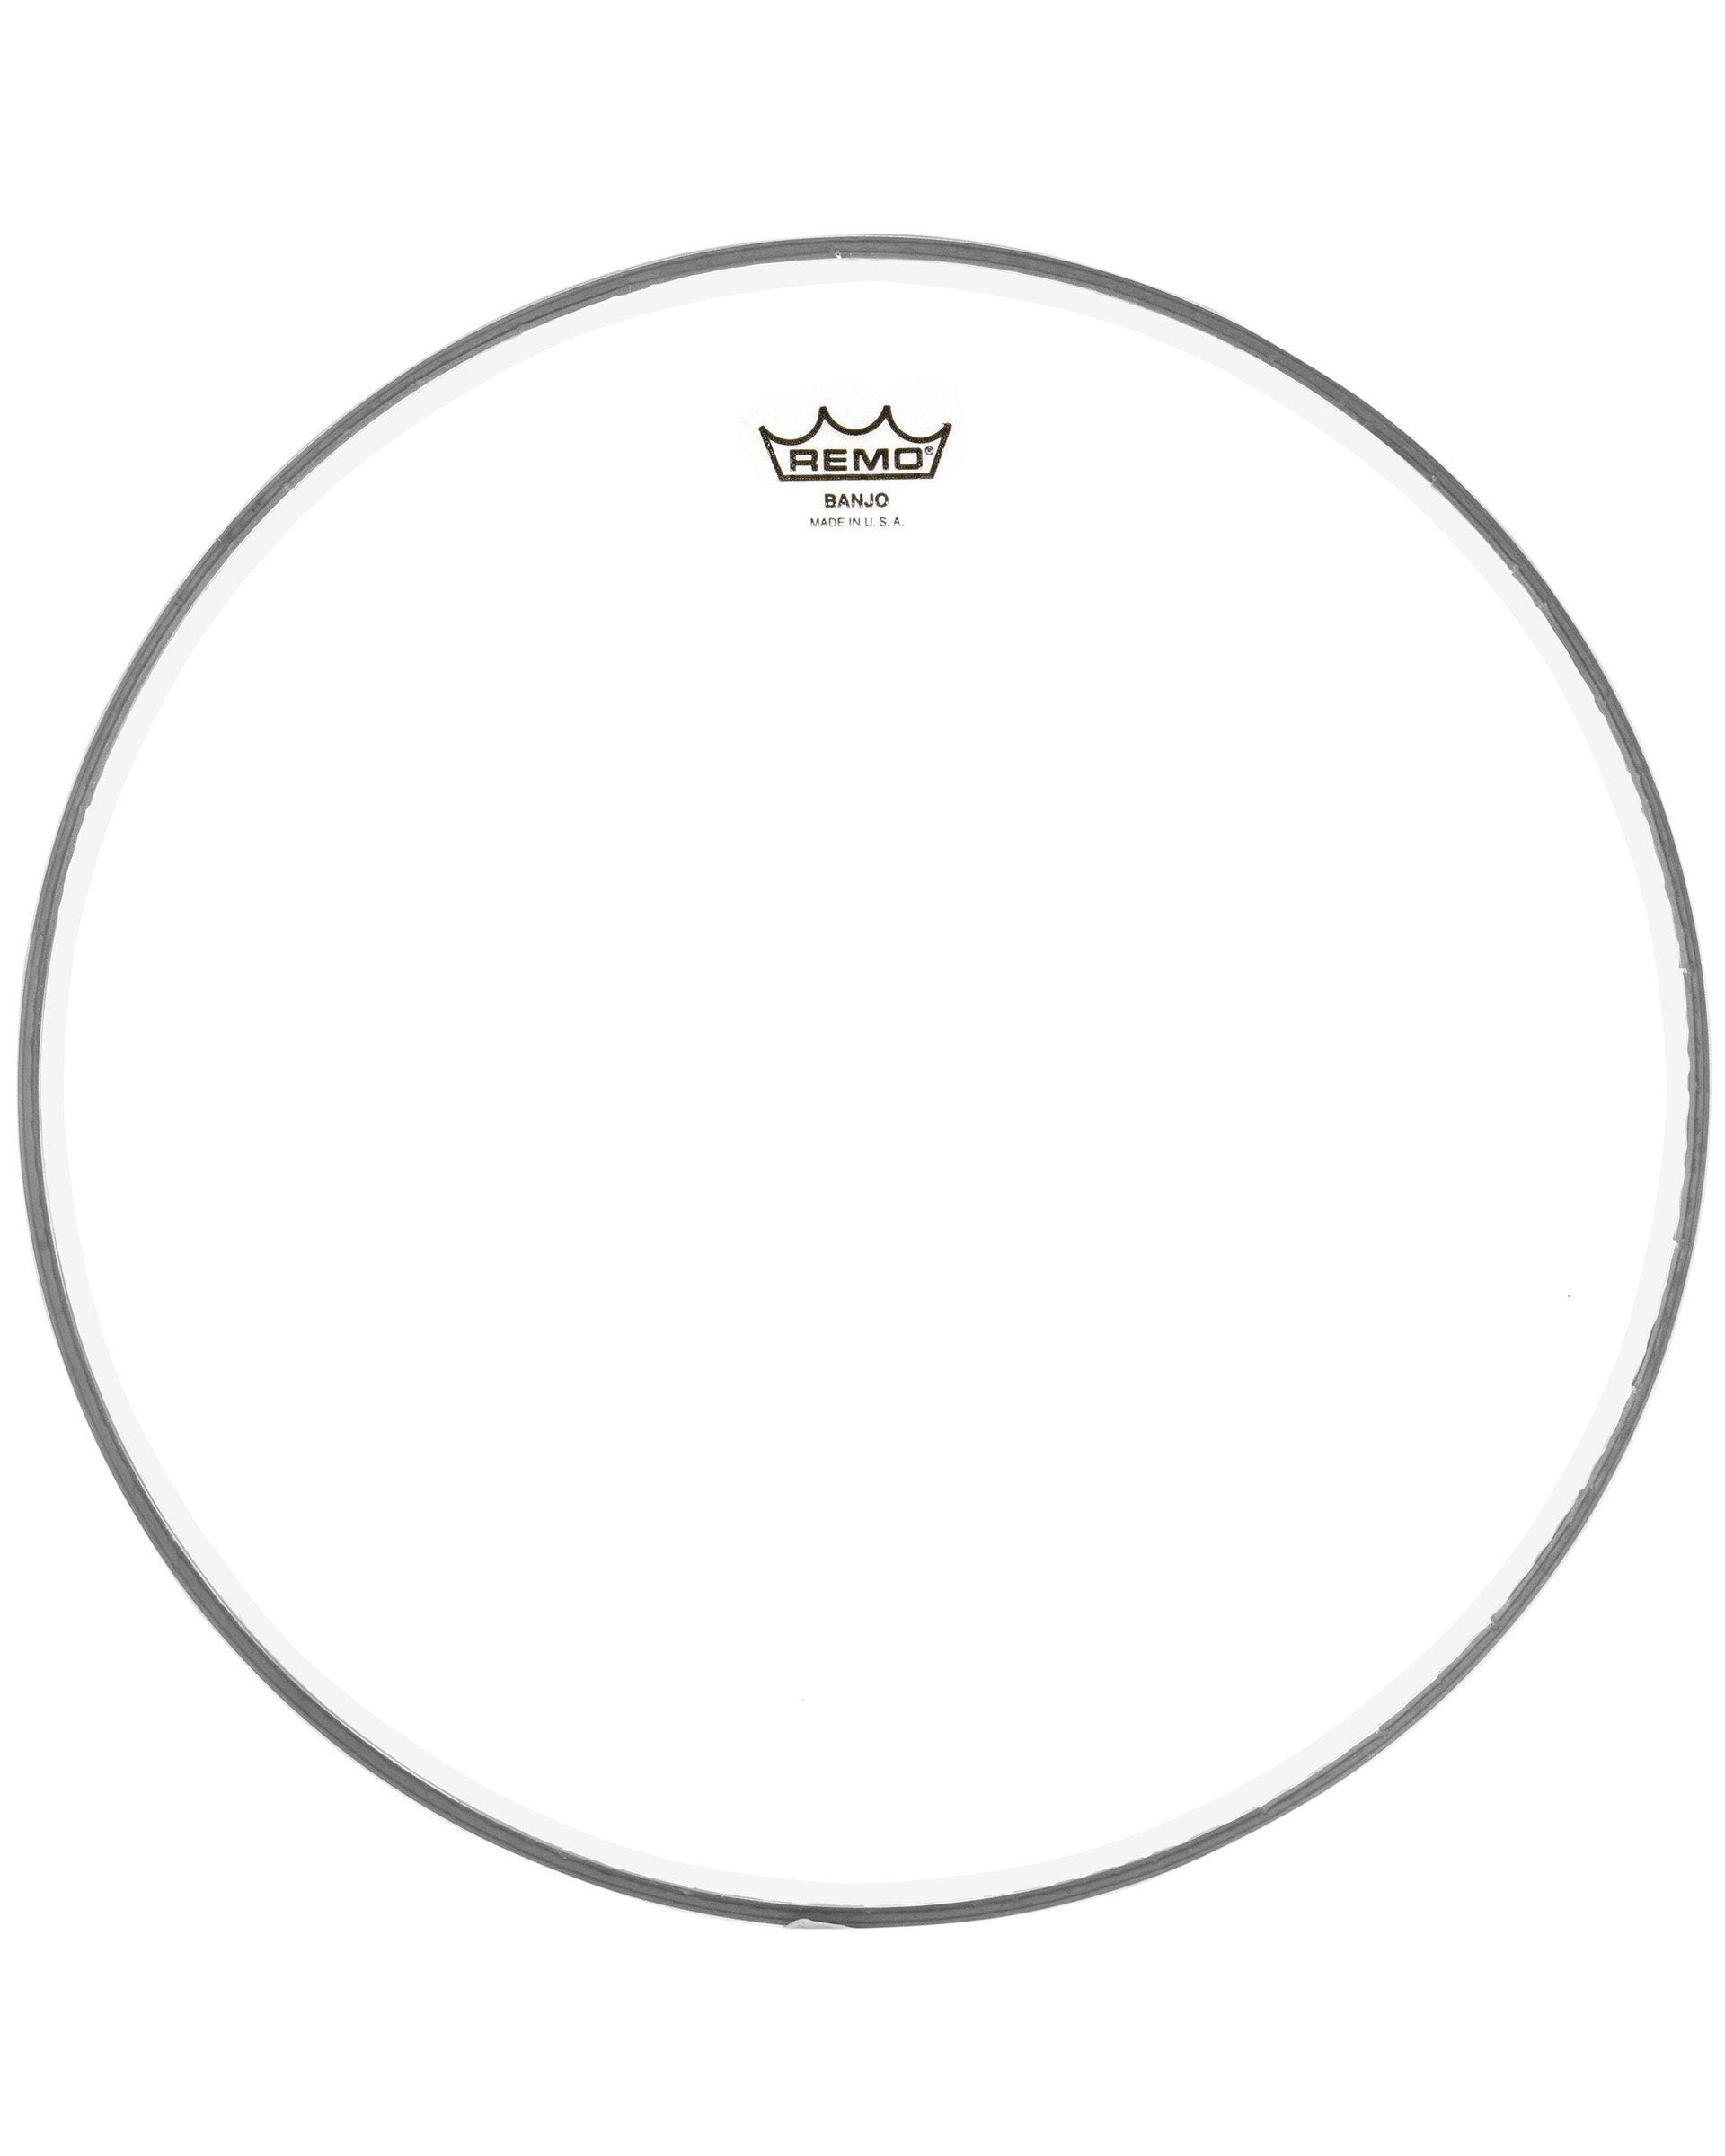 Image 1 of Remo Clear Banjo Head, 10 11/16 Inch Diameter, Medium Crown (7/16 Inch) - - SKU# B1011-M-CLR : Product Type Accessories & Parts : Elderly Instruments